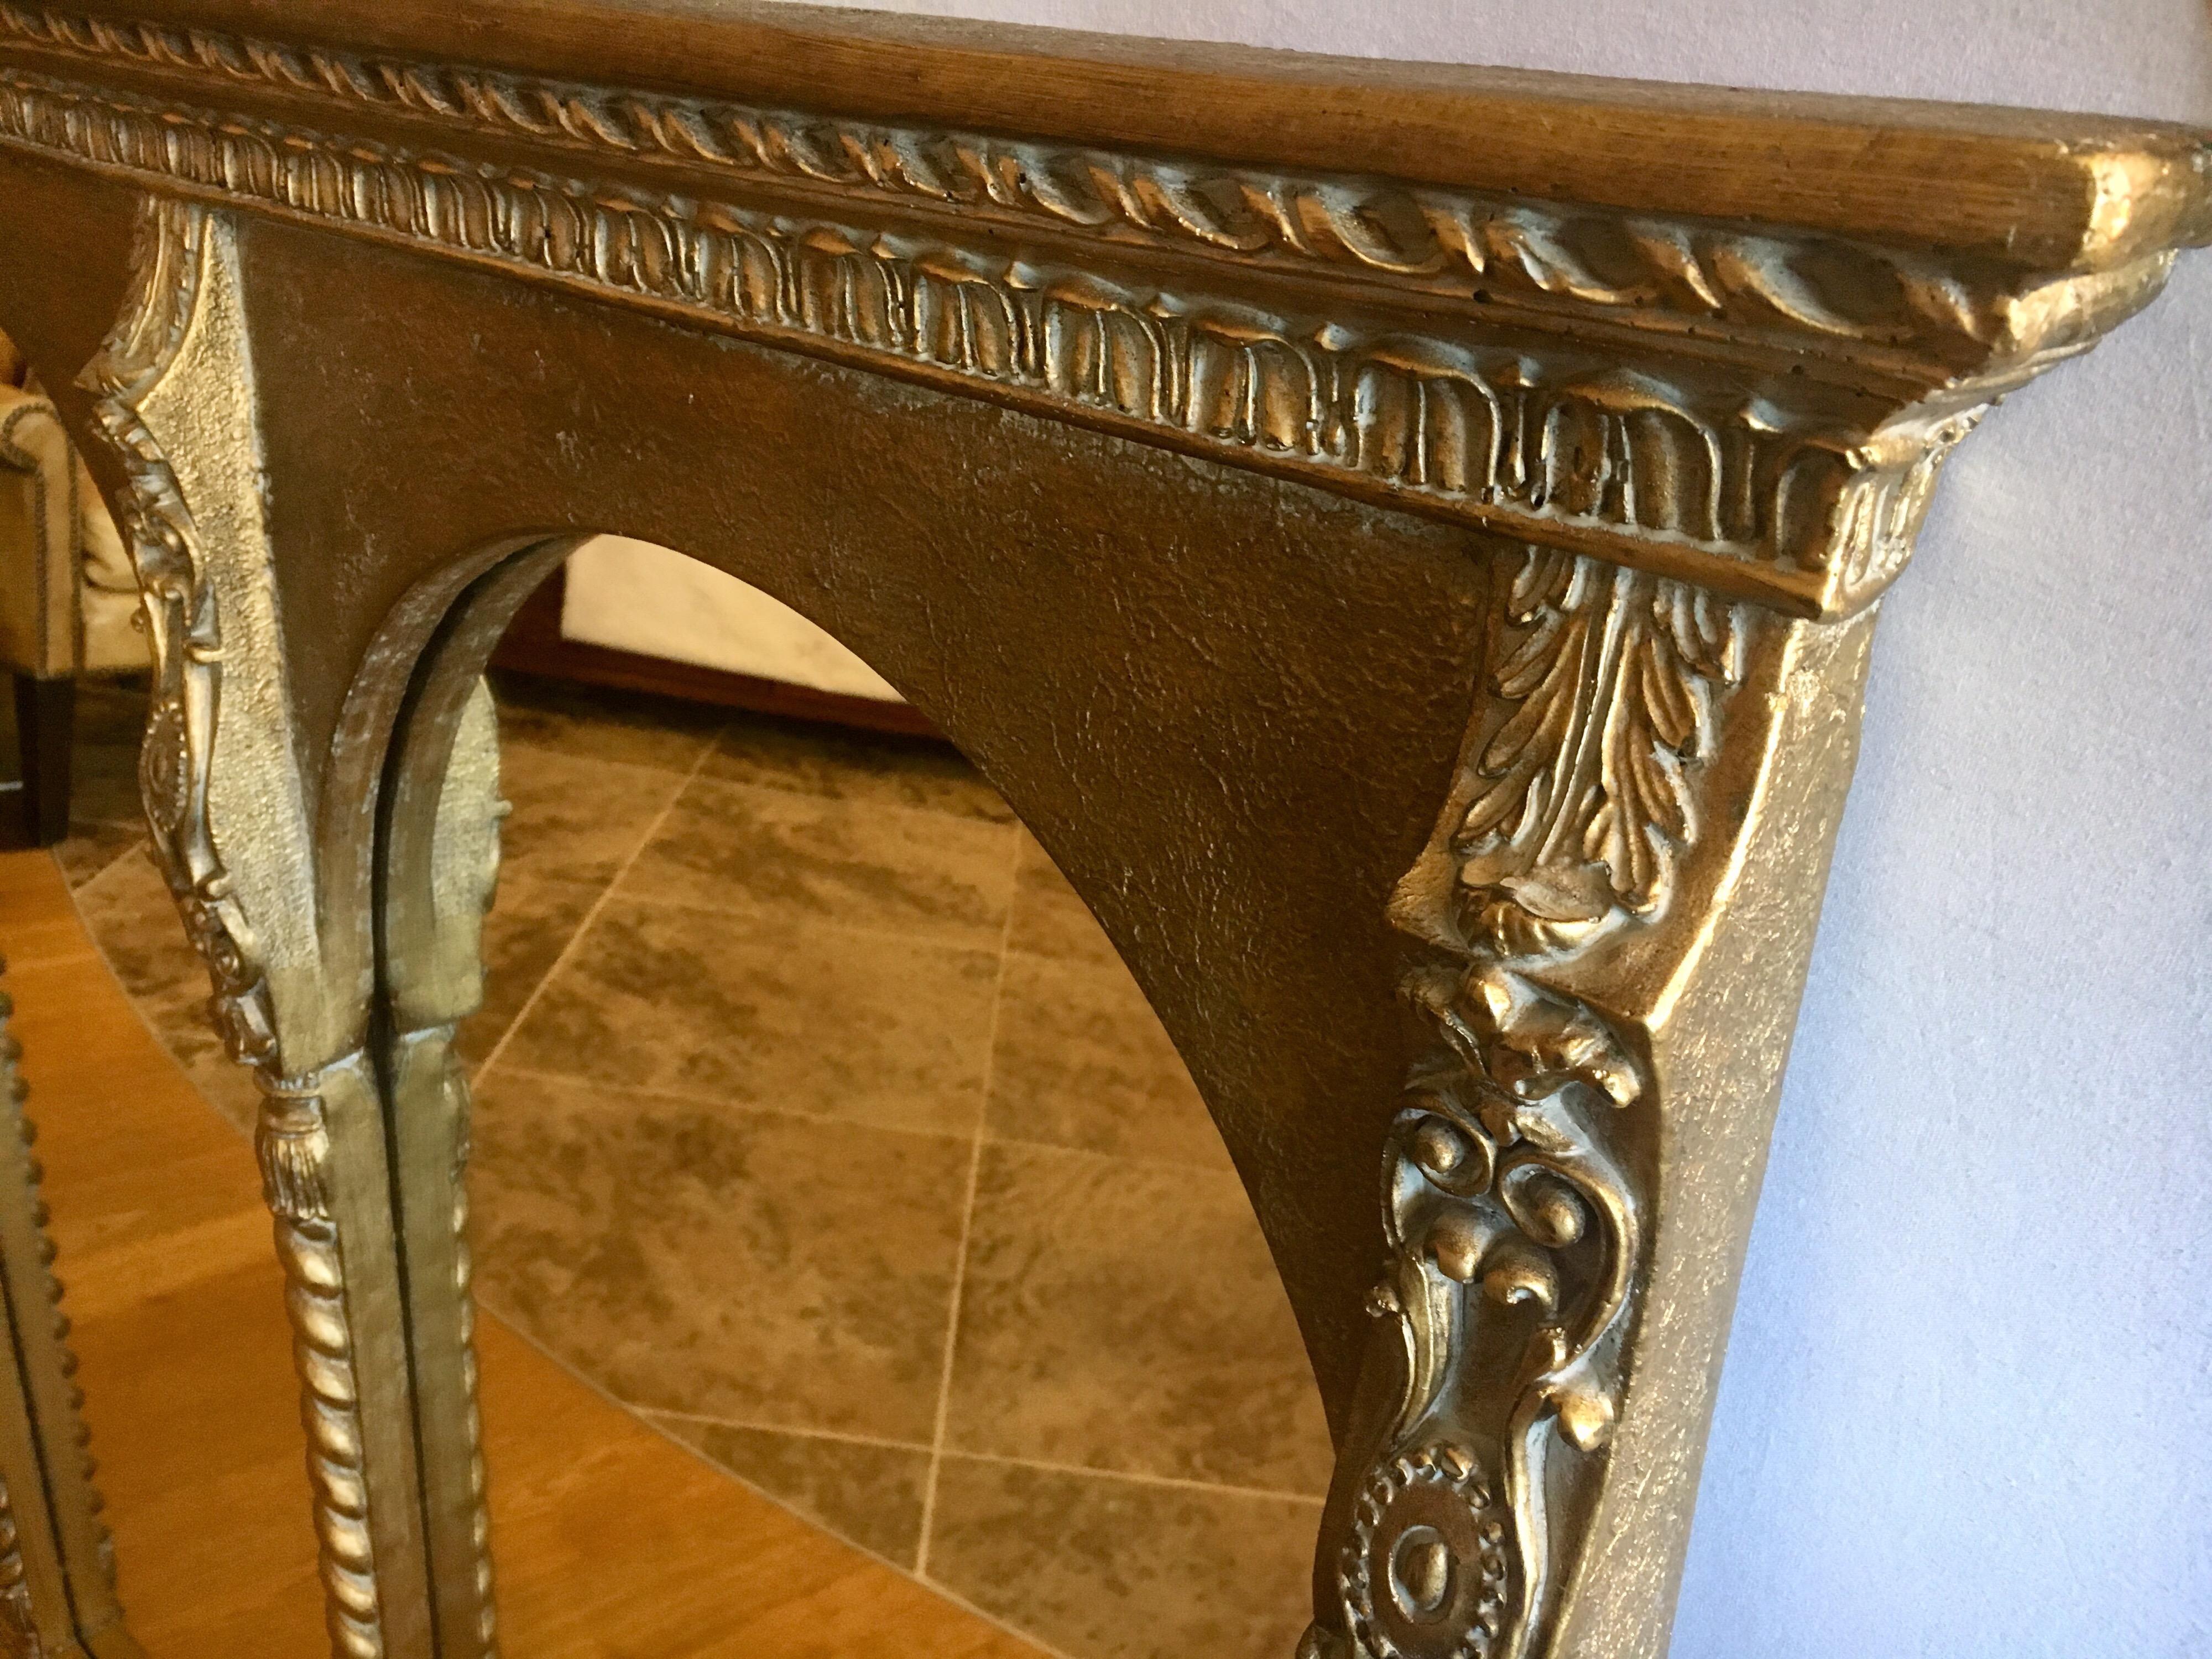 Empire style gilt composite triptych mirror for over the mantel. Made of composite and wood with triple mirror framed at front. Quite gorgeous.